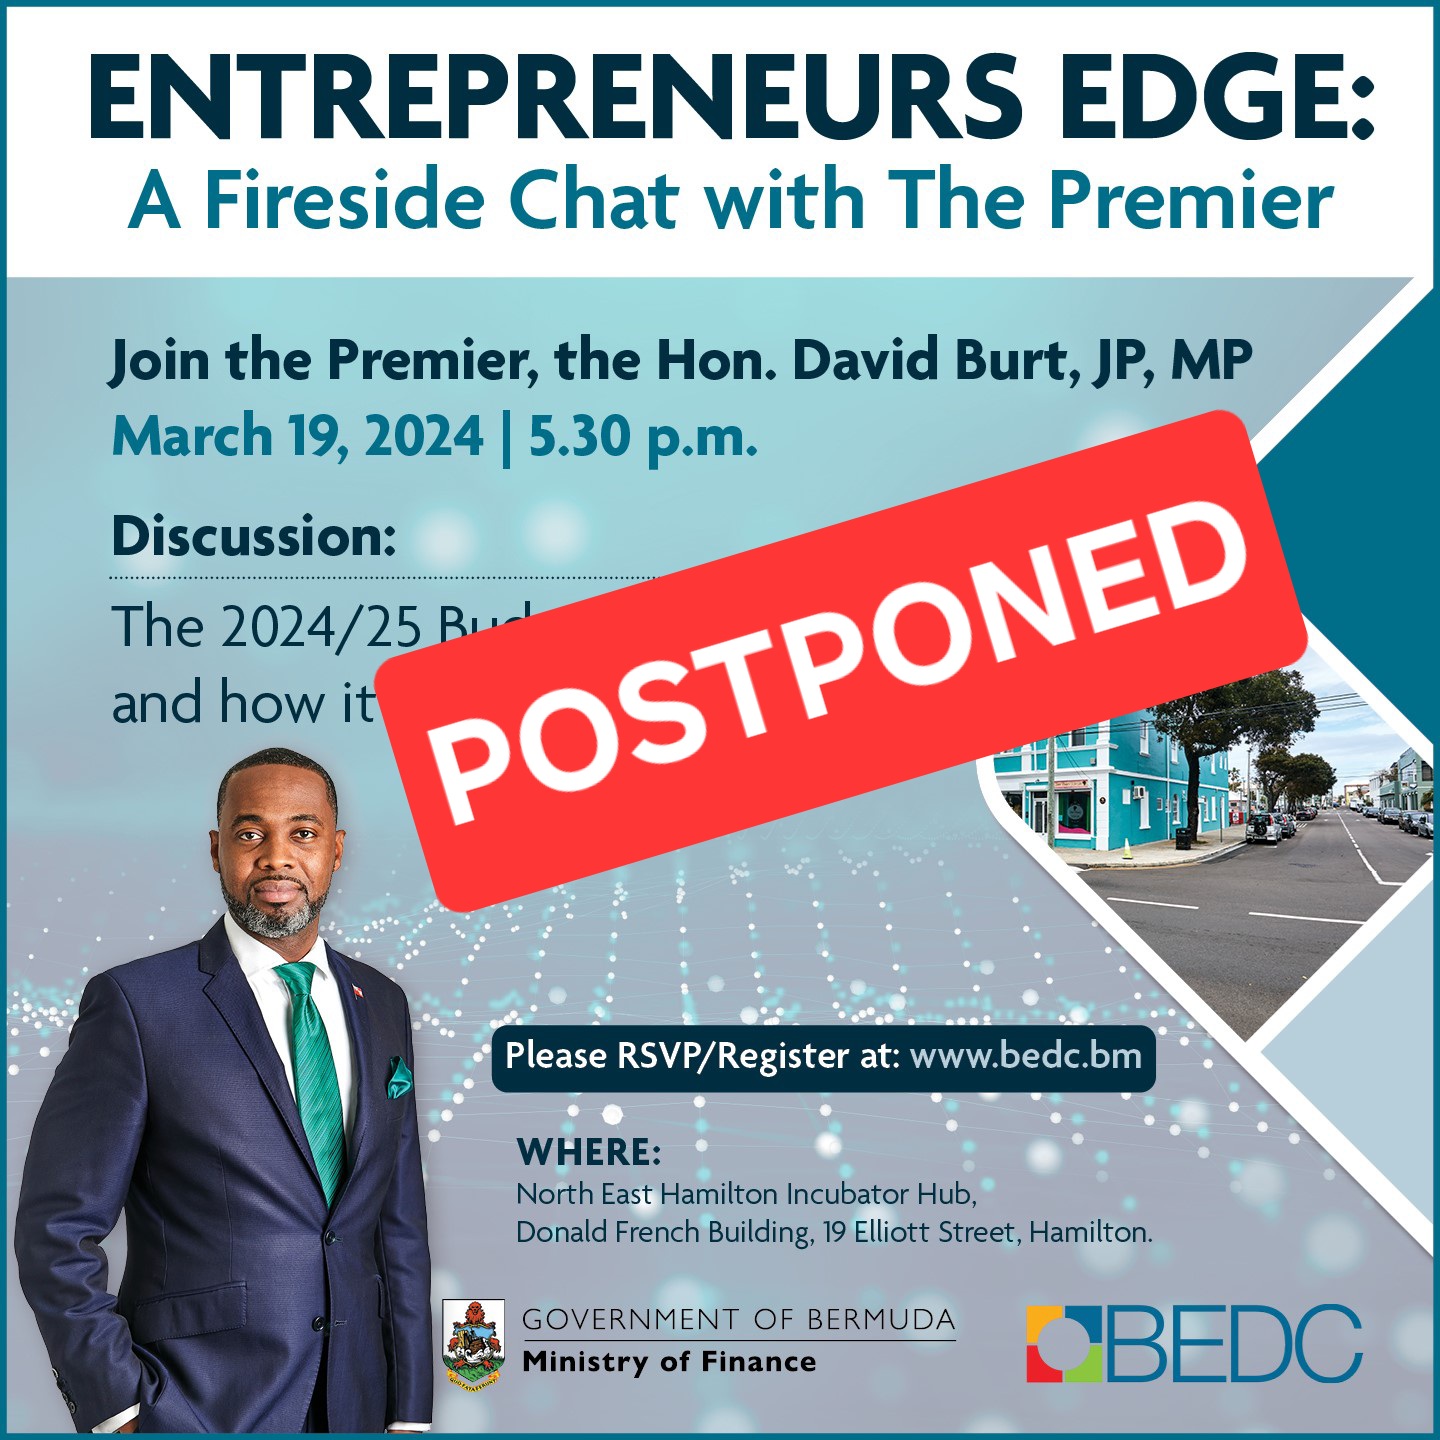 Entrepreneur’s Edge: A Fireside Chat with The Premier